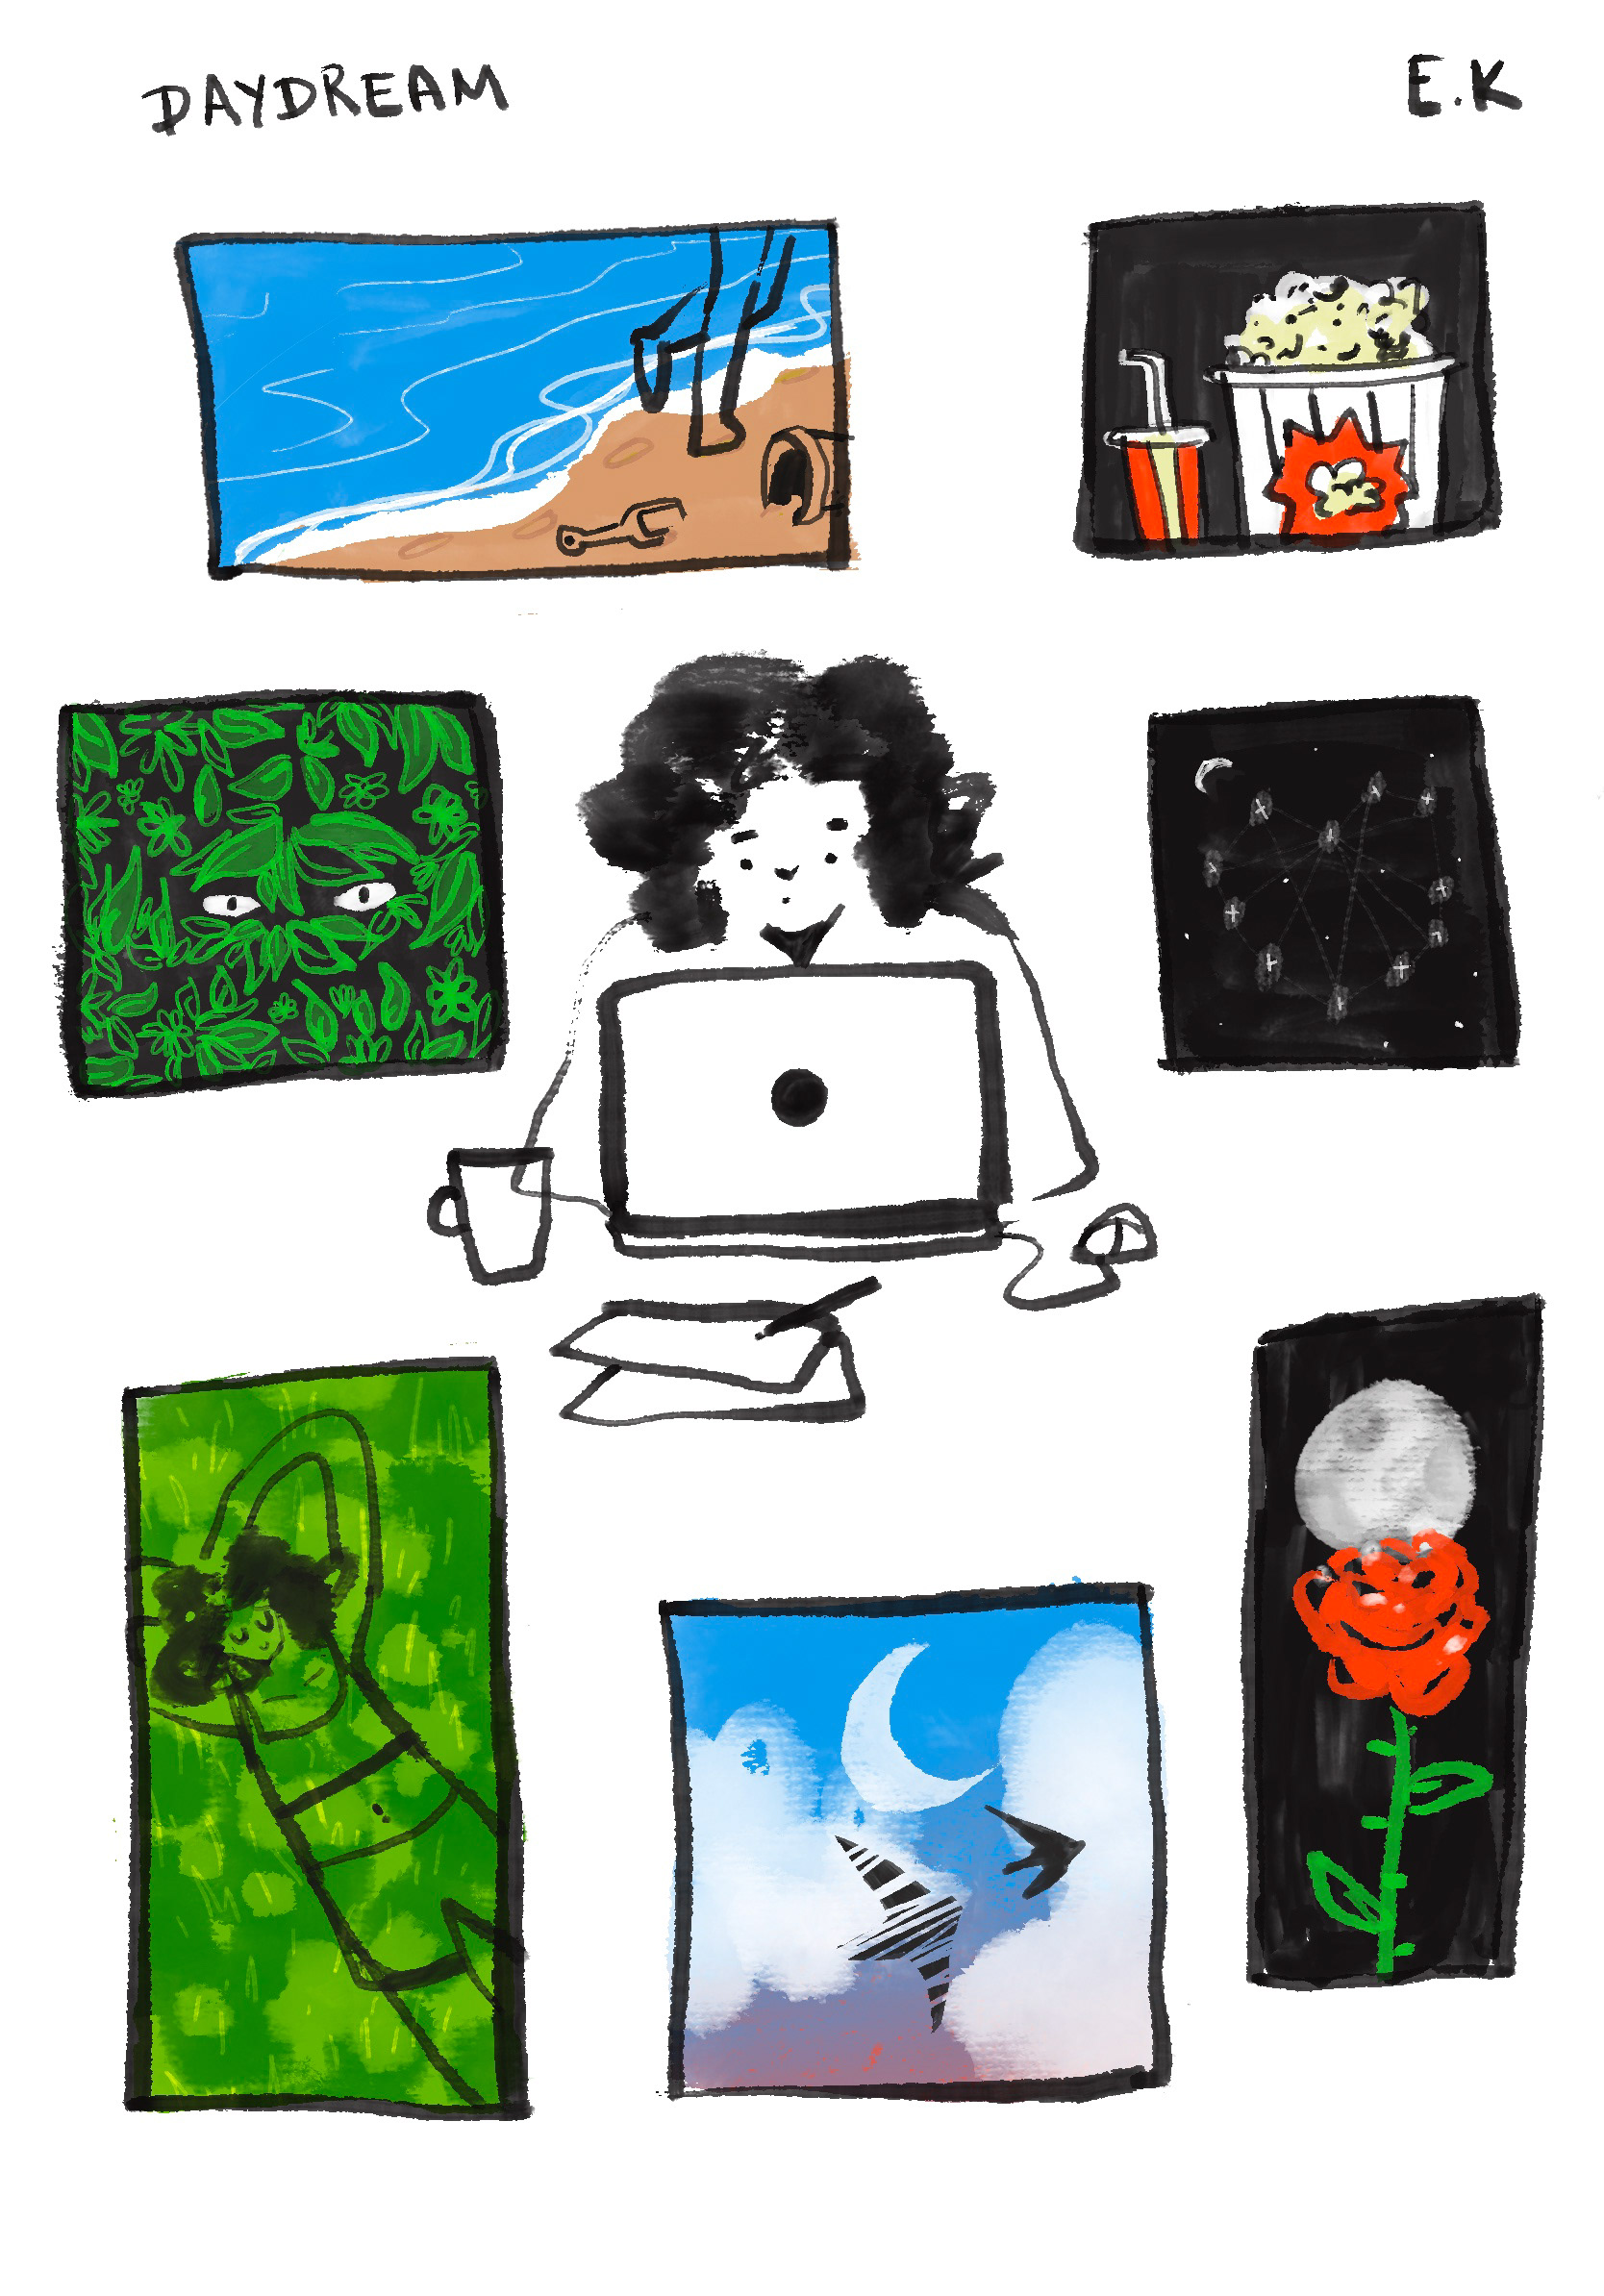 One page comic story by Edanur Kuntman called Daydream. There is a center image of a woman working on a laptop surrounded by panels around each depicting different random images such as popcorn, a rose, the girl lying on the grass etc.